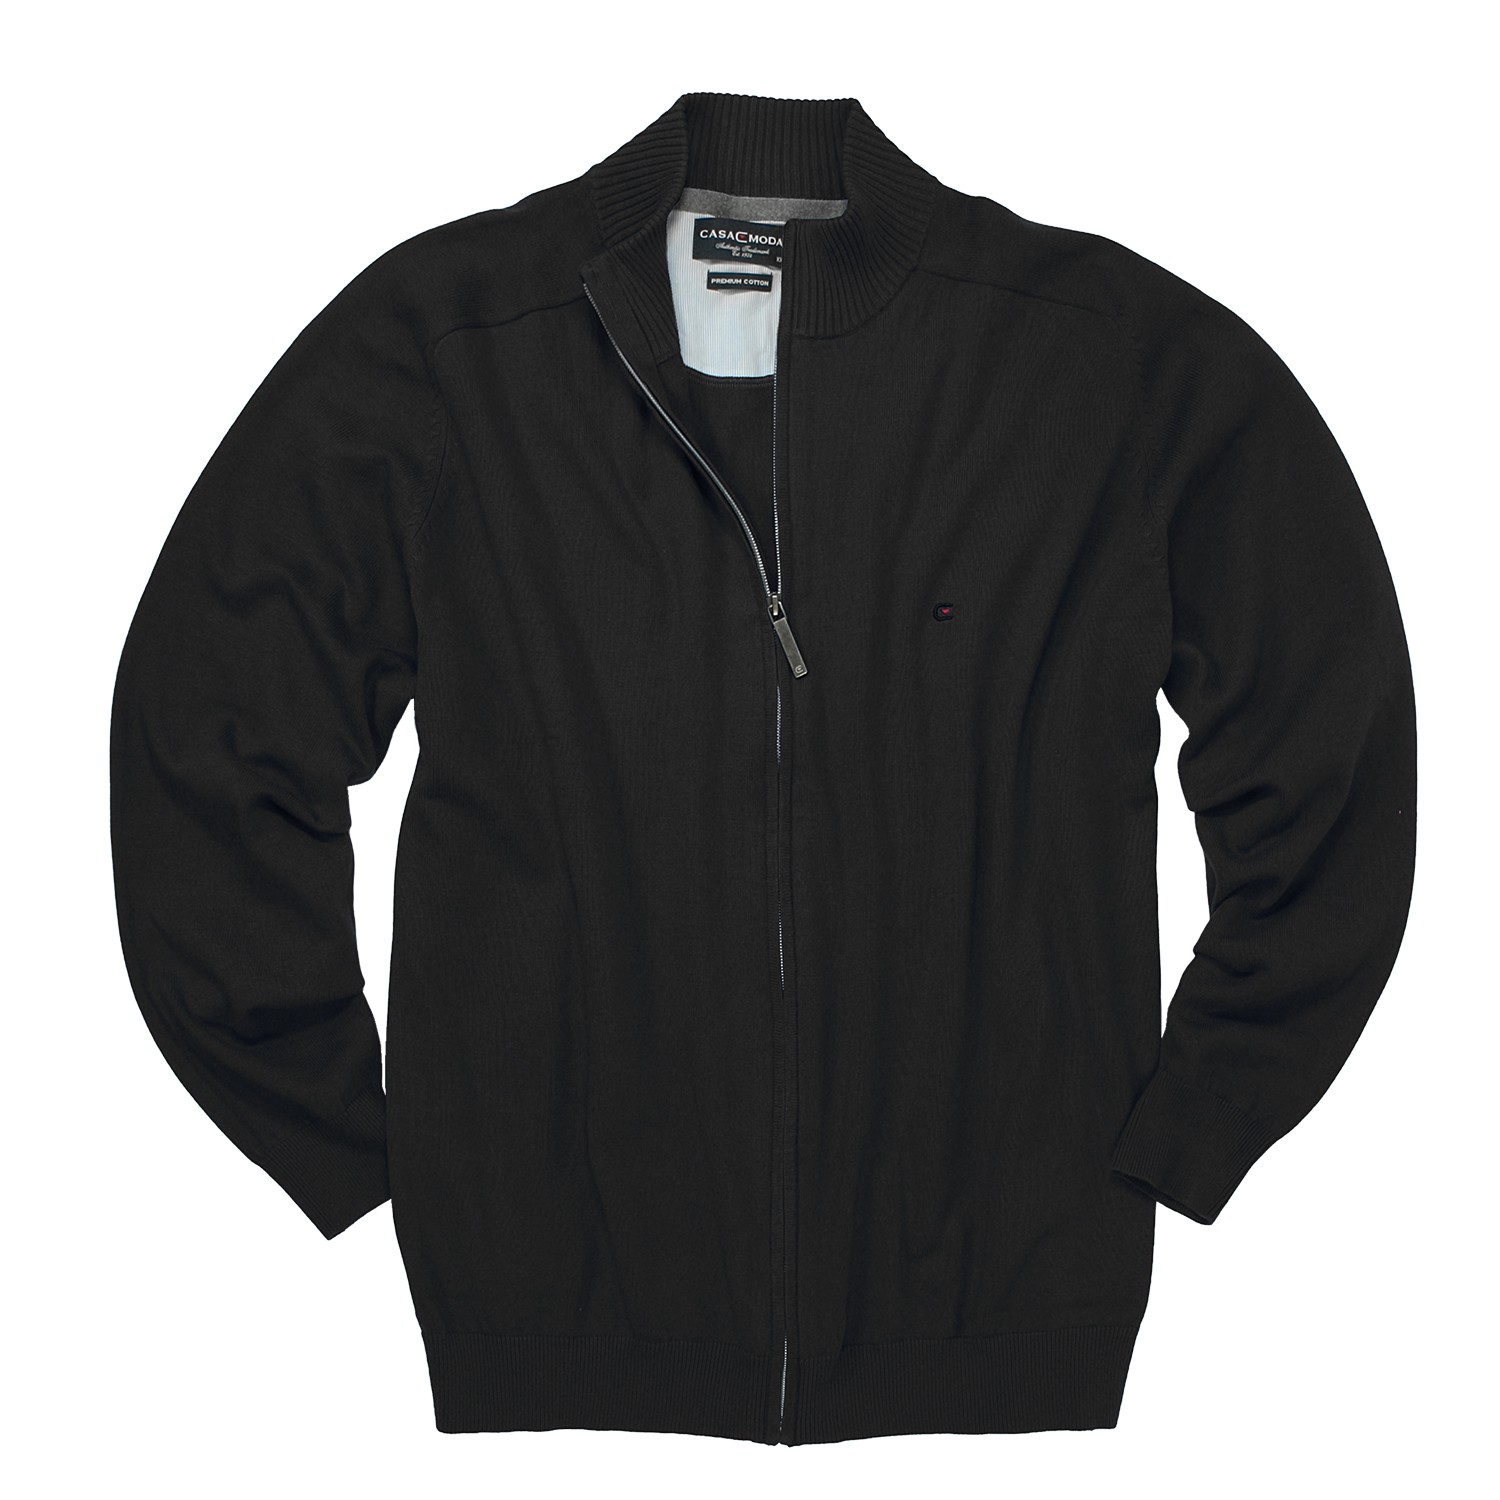 Cardigan for men by Casamoda in black with zip in XXL sizes up to 6XL